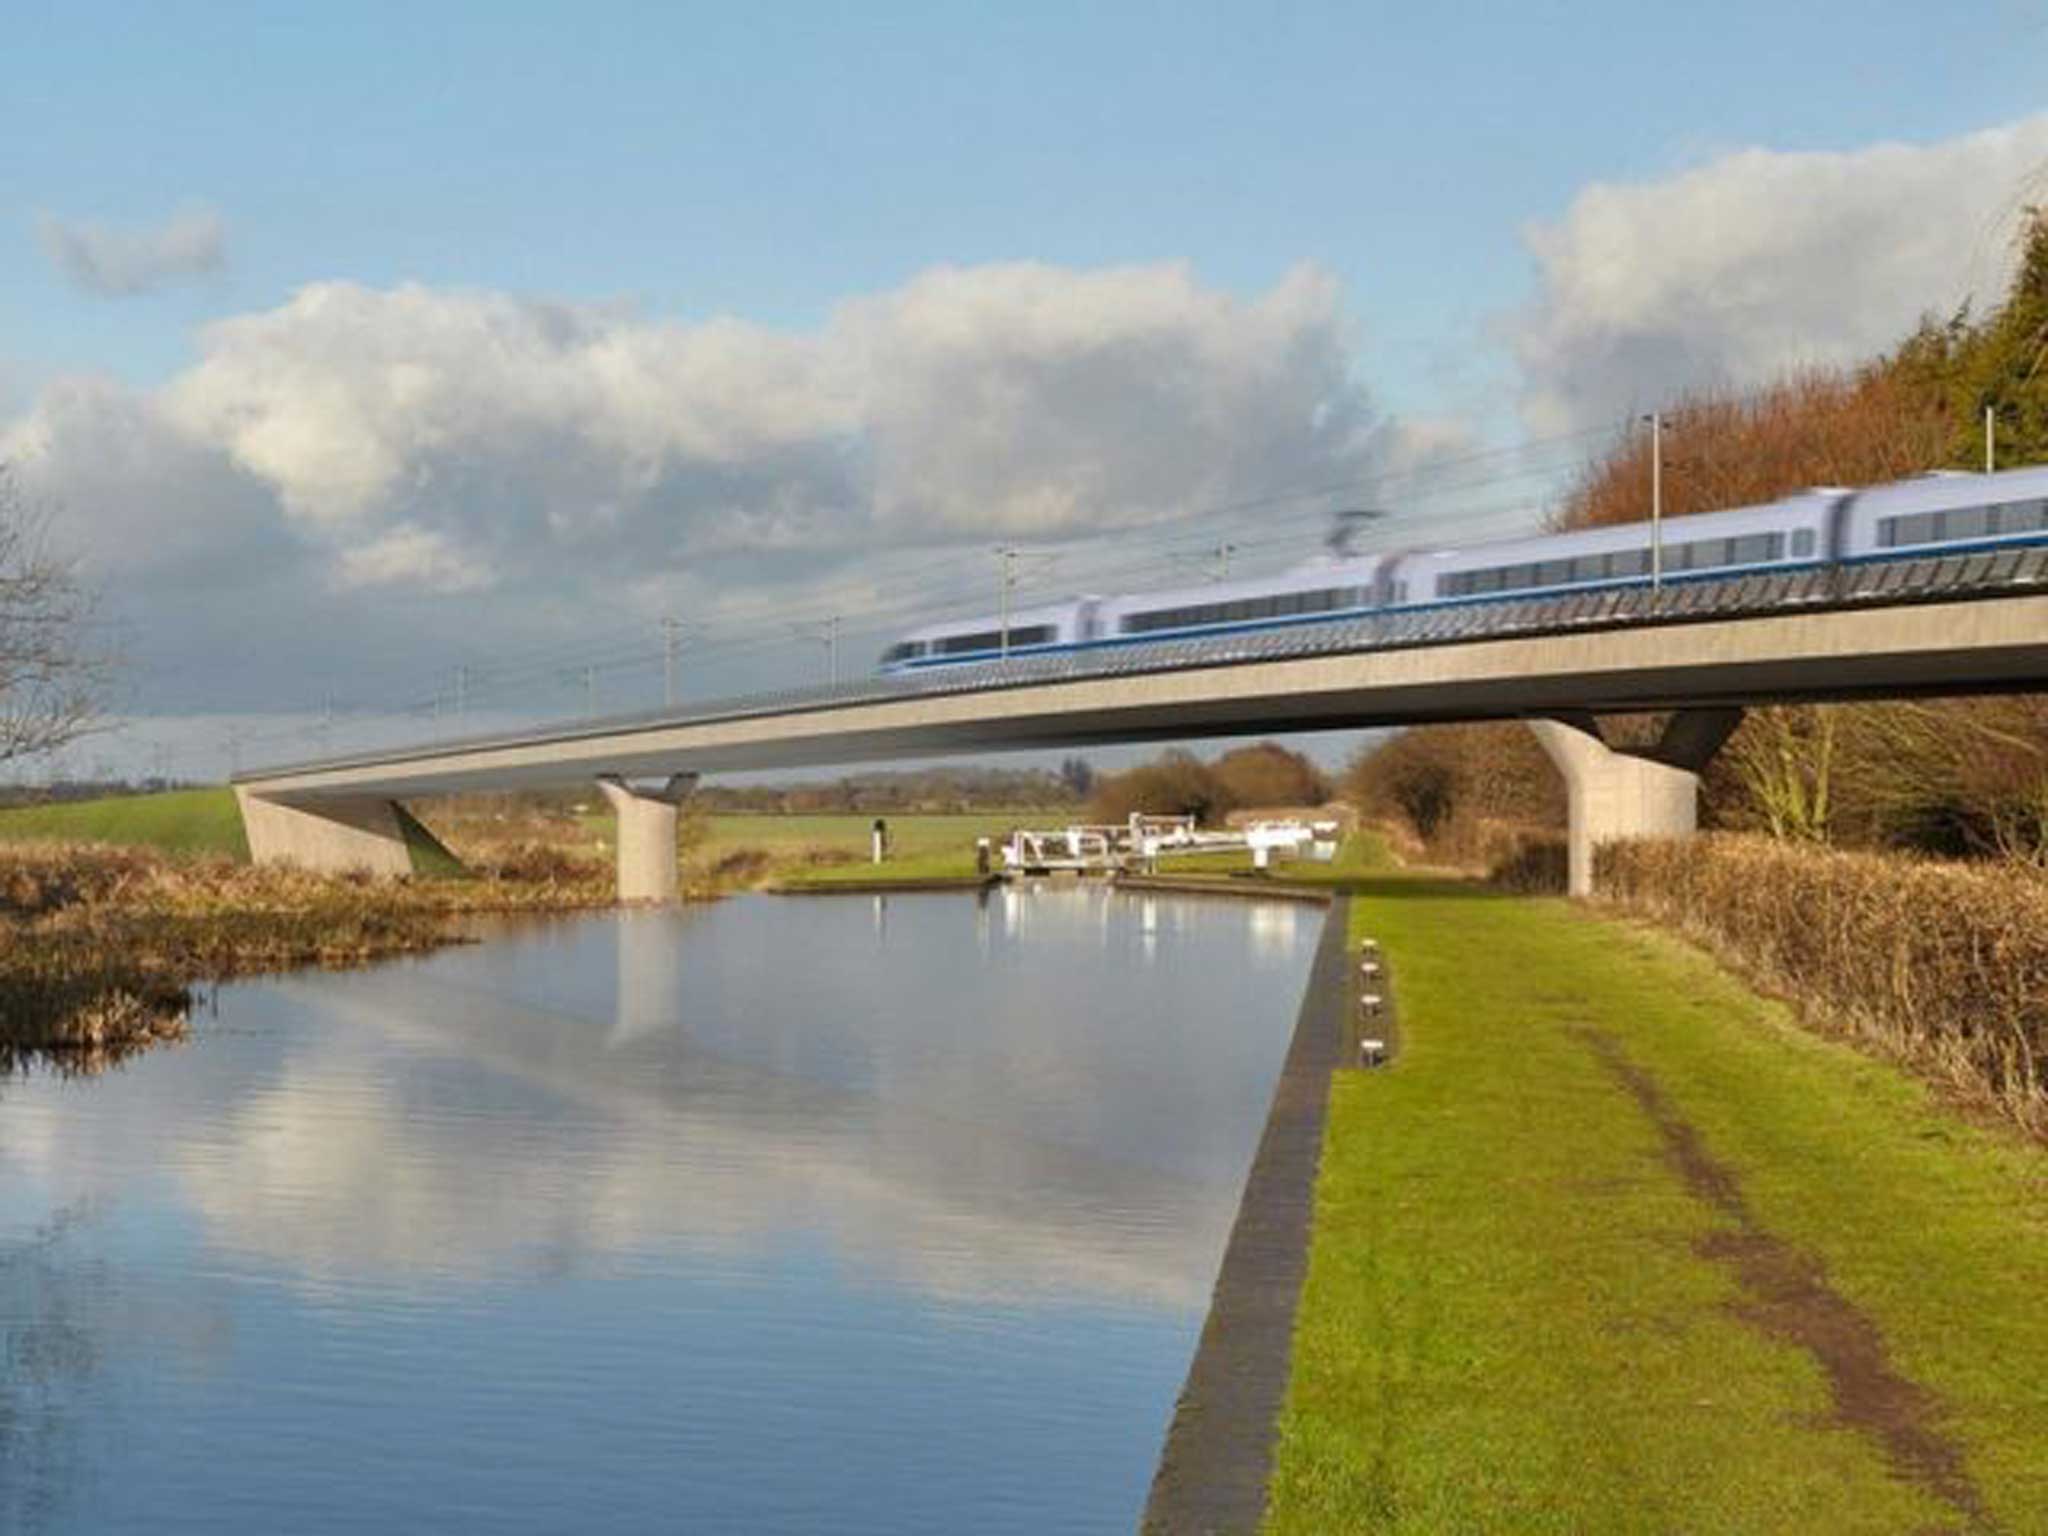 HS2’s under-fire rail line, as it might look crossing the Birmingham and Fazeley canal